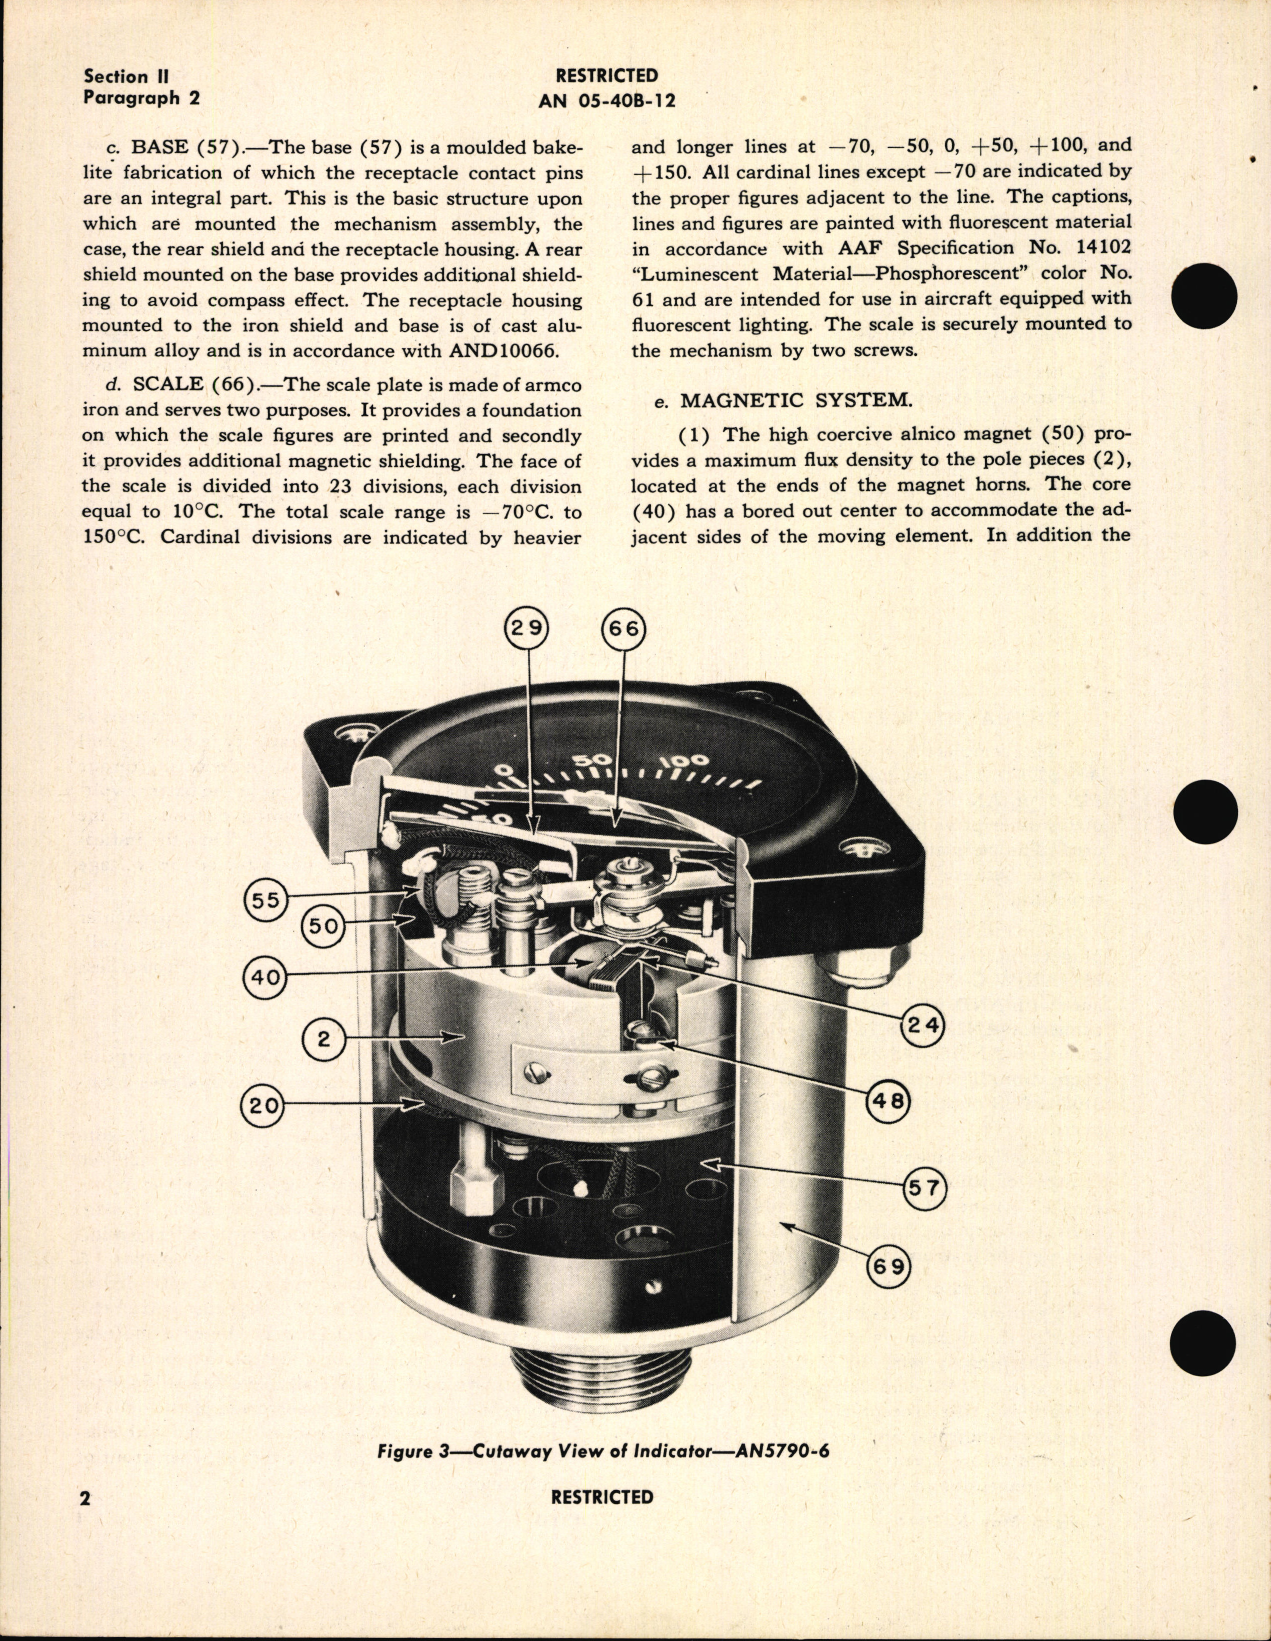 Sample page 8 from AirCorps Library document: Handbook of Instructions with Parts Catalog for Thermometer Indicators